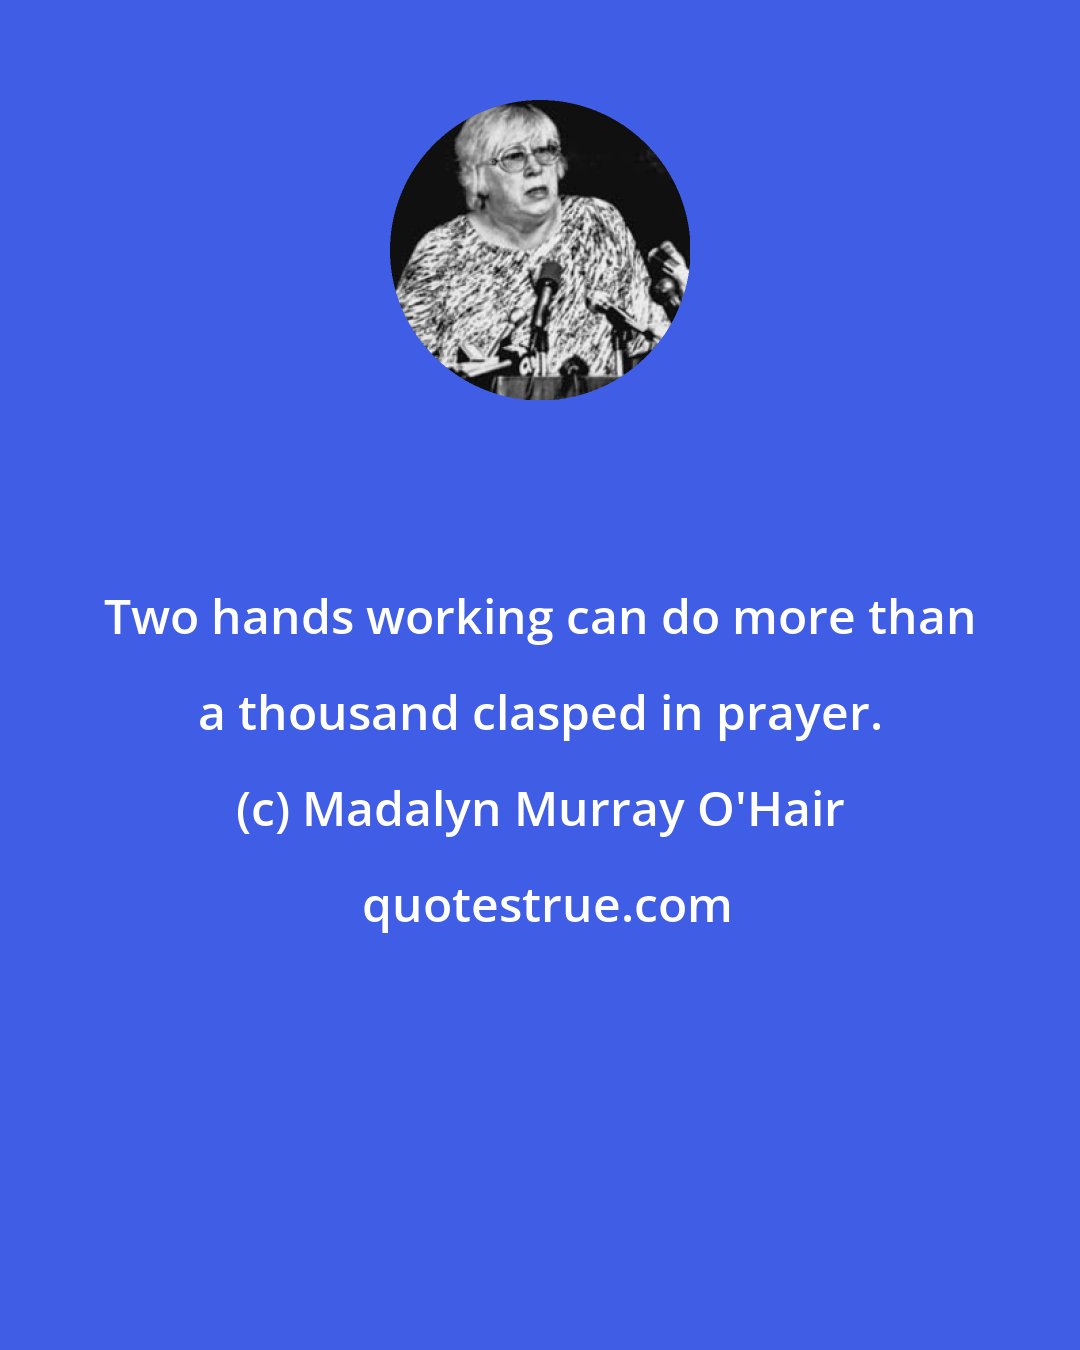 Madalyn Murray O'Hair: Two hands working can do more than a thousand clasped in prayer.